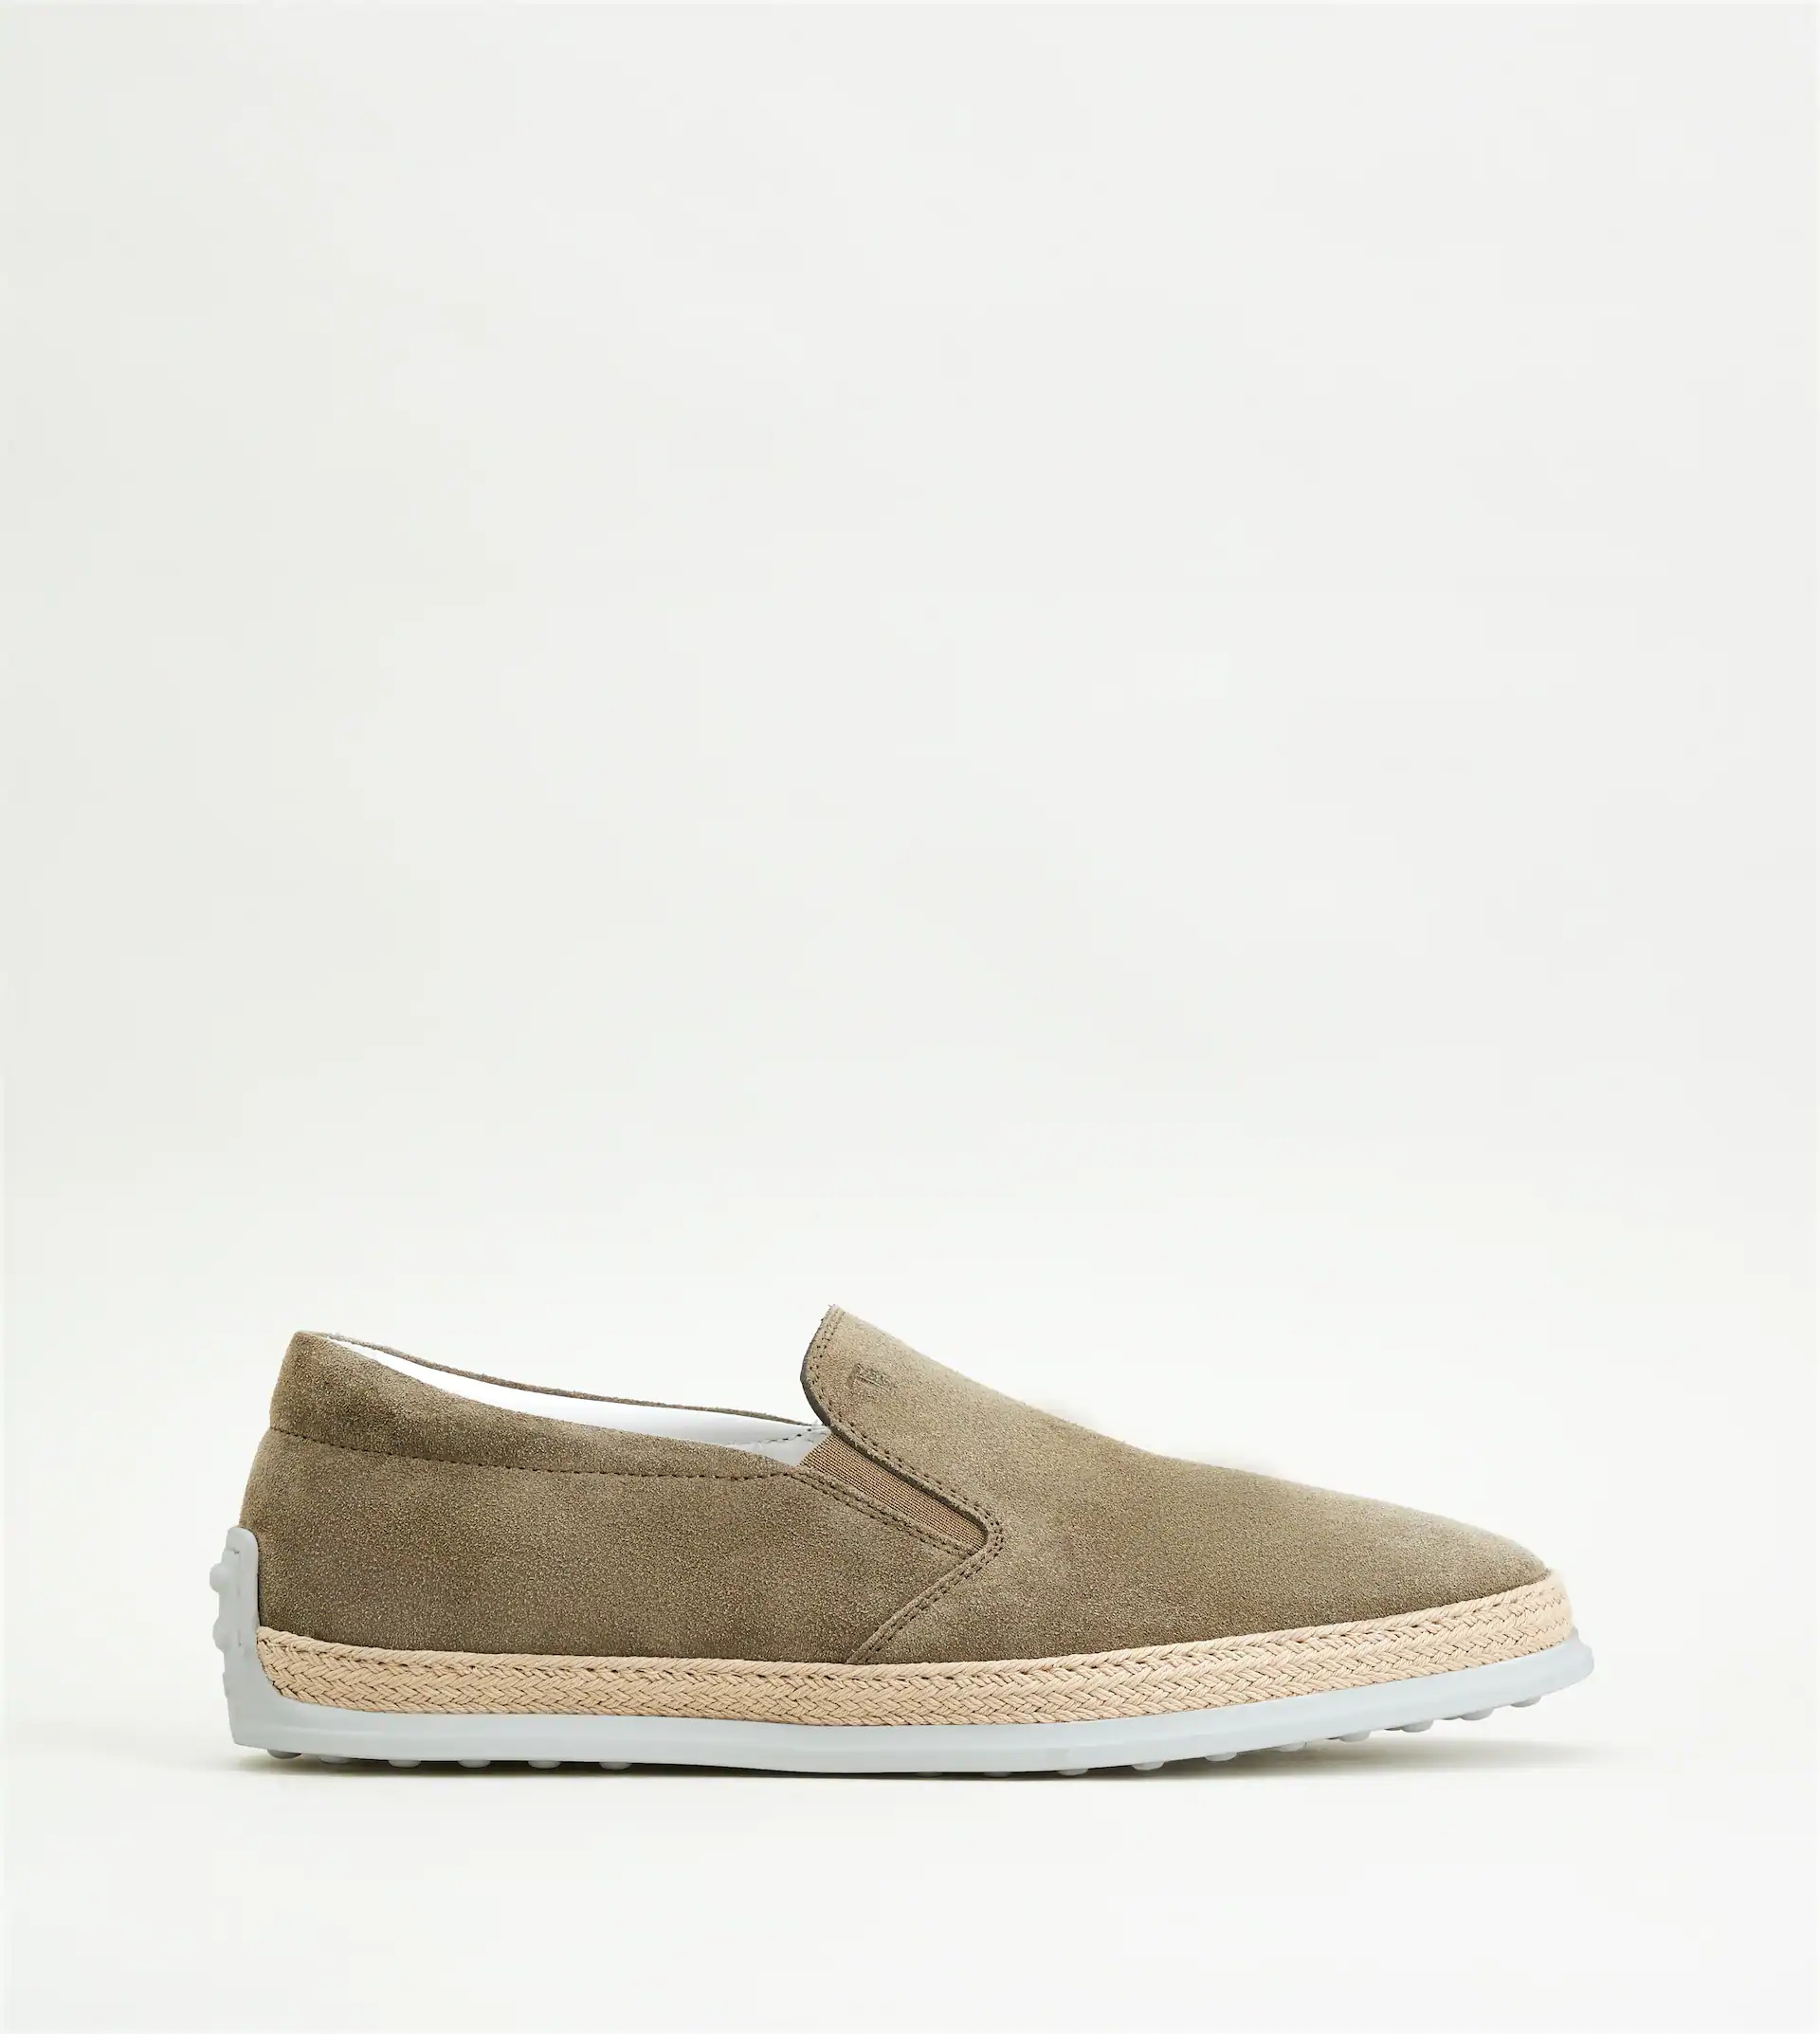 SLIP-ON SHOES IN SUEDE - BROWN - 1